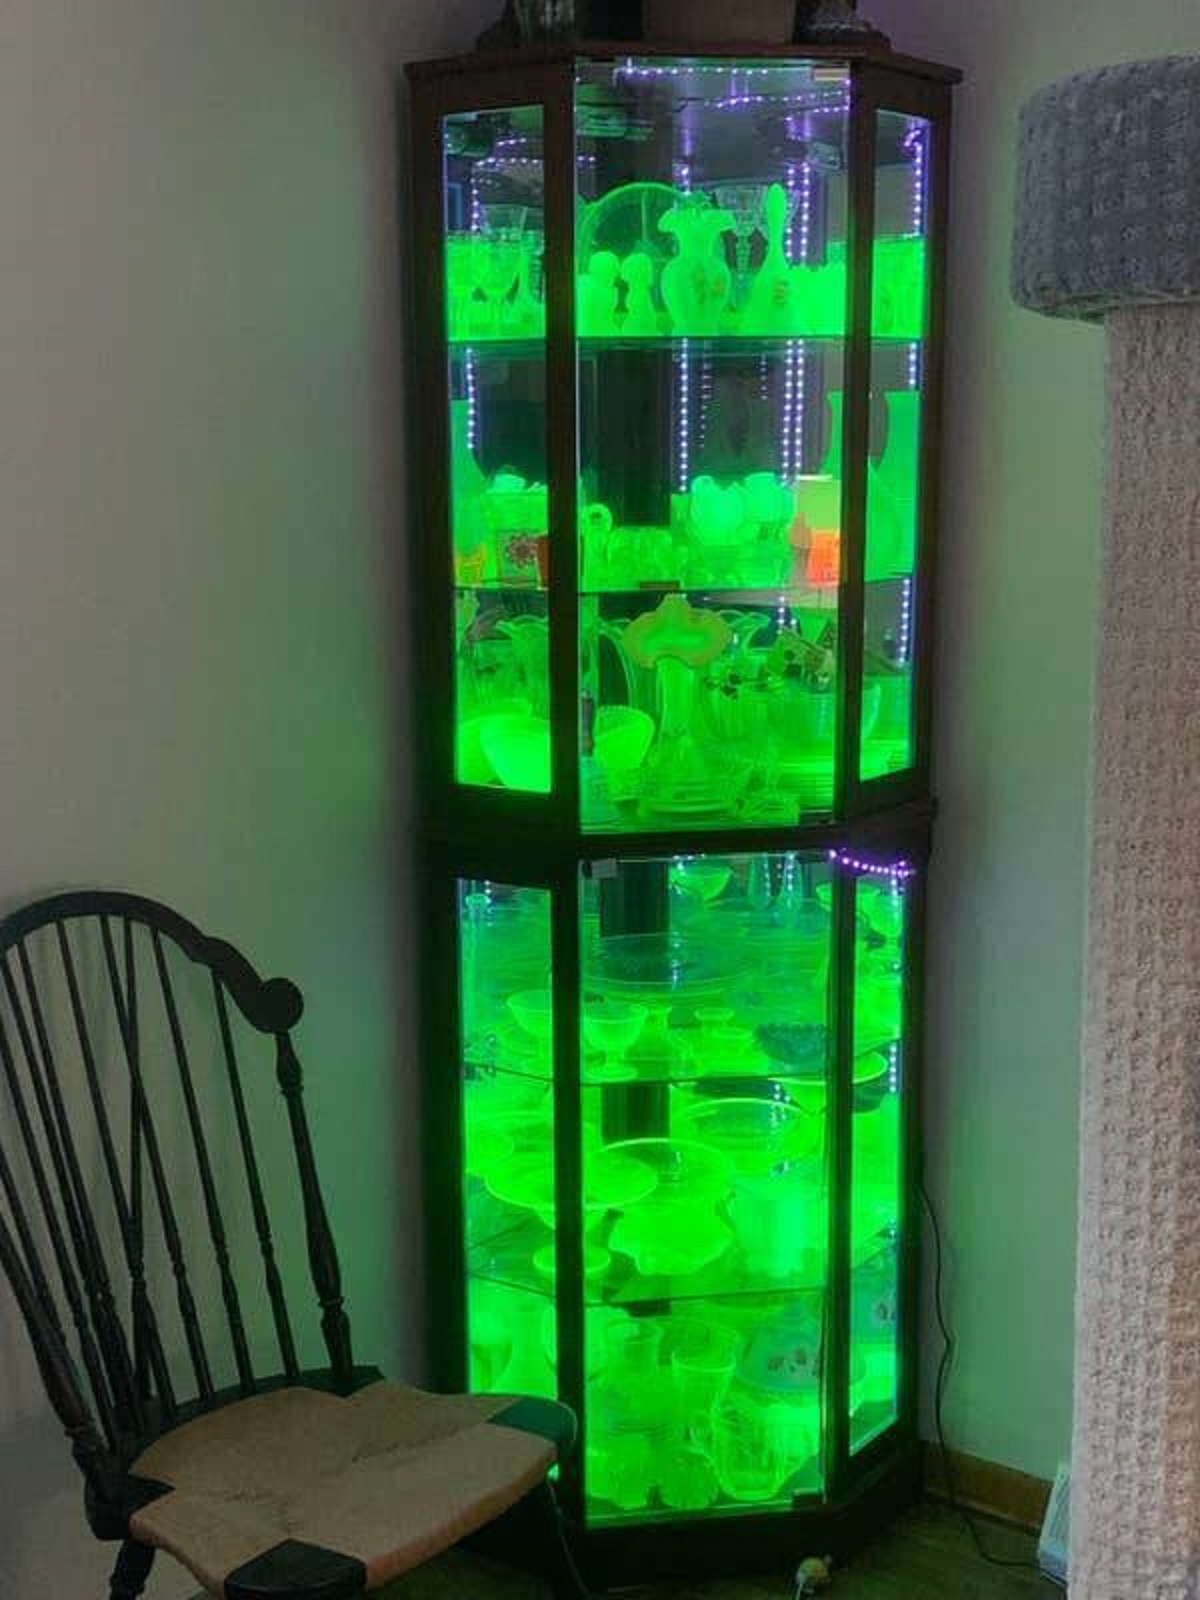 This is what a cabinet full of uranium glass looks like under UV light: